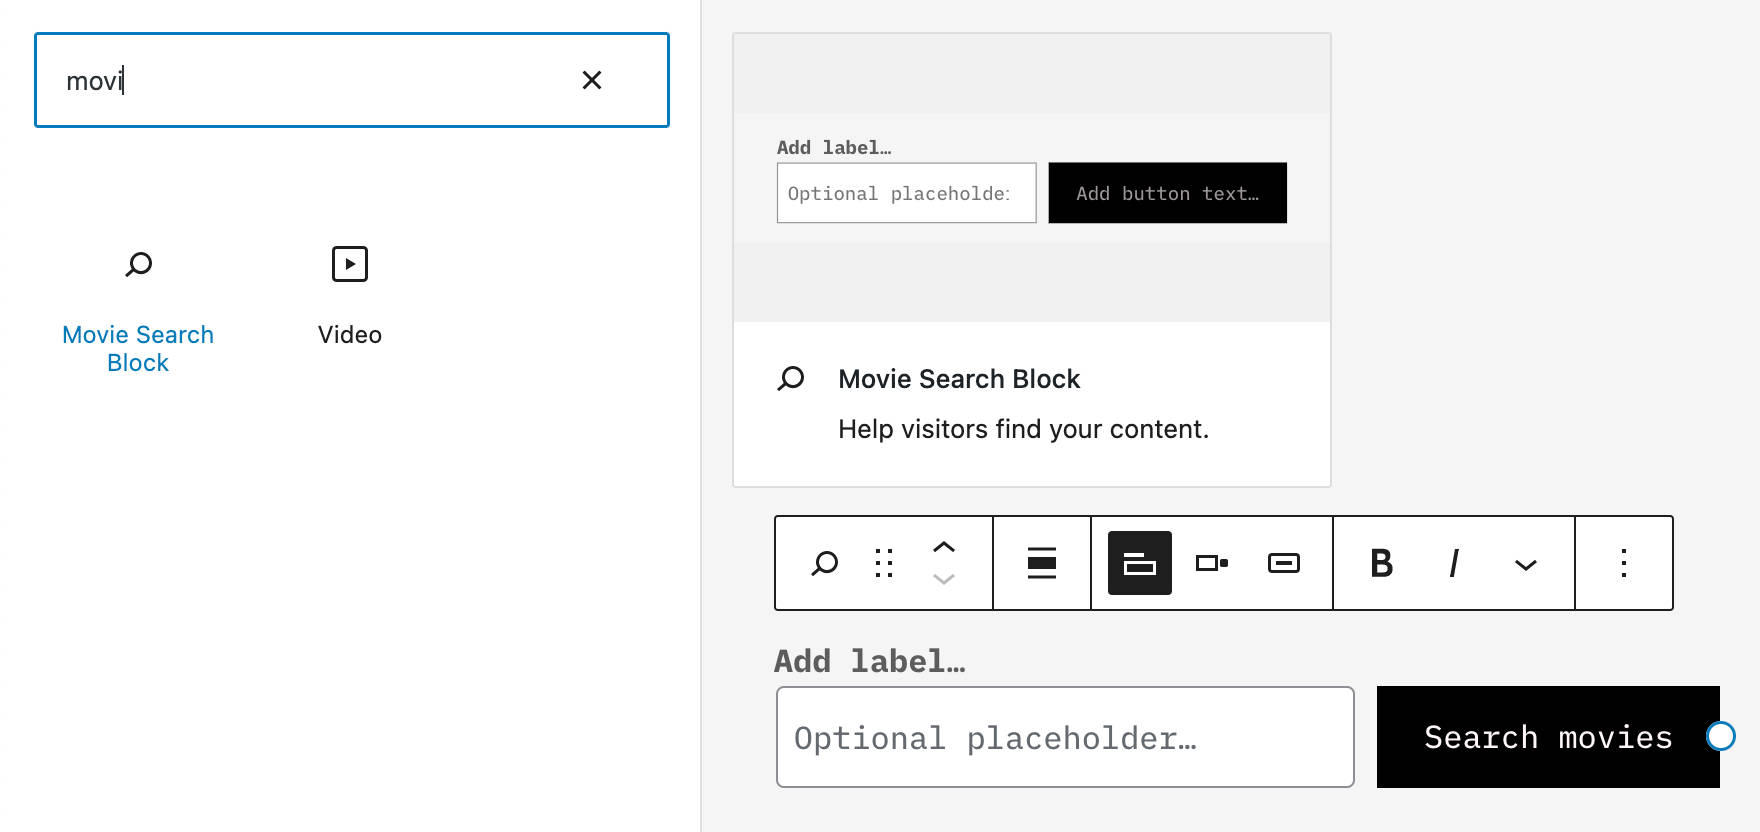 WordPress 6.1 now has a custom Search block variation in the block inserter